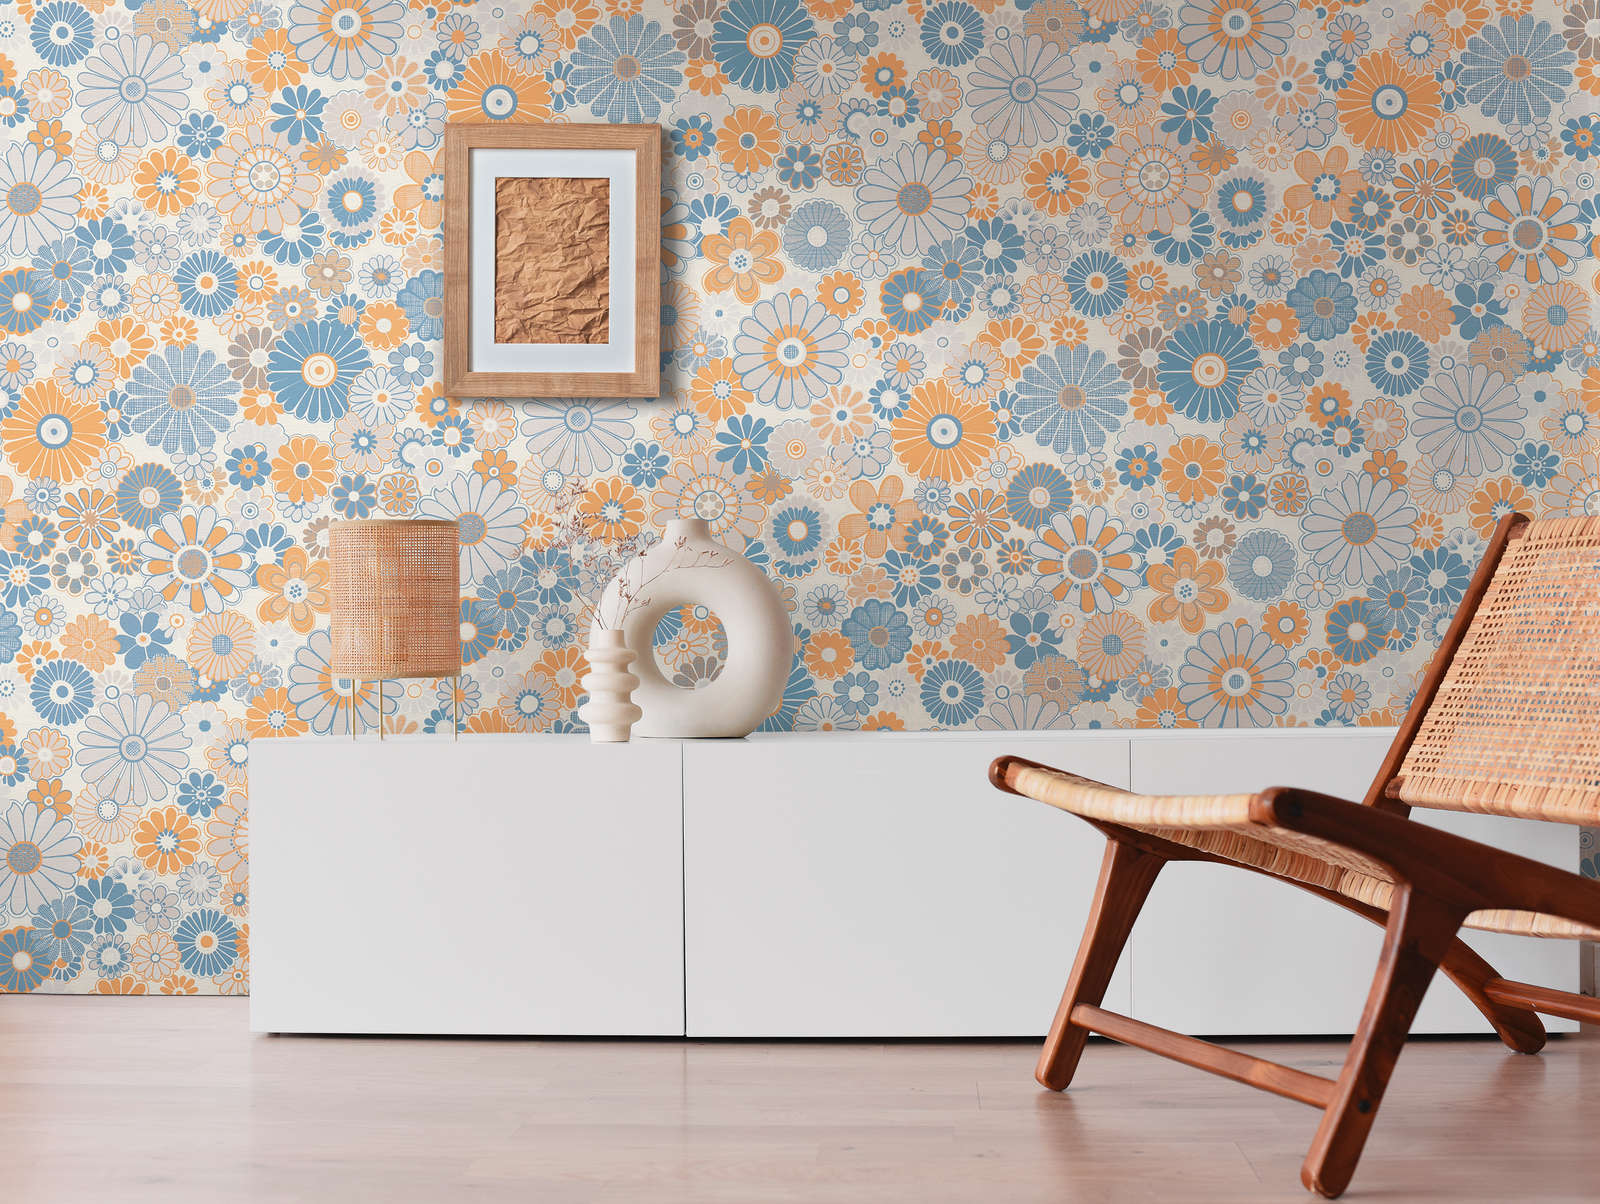             Non-woven wallpaper with floral pattern in retro style - blue, orange, grey
        